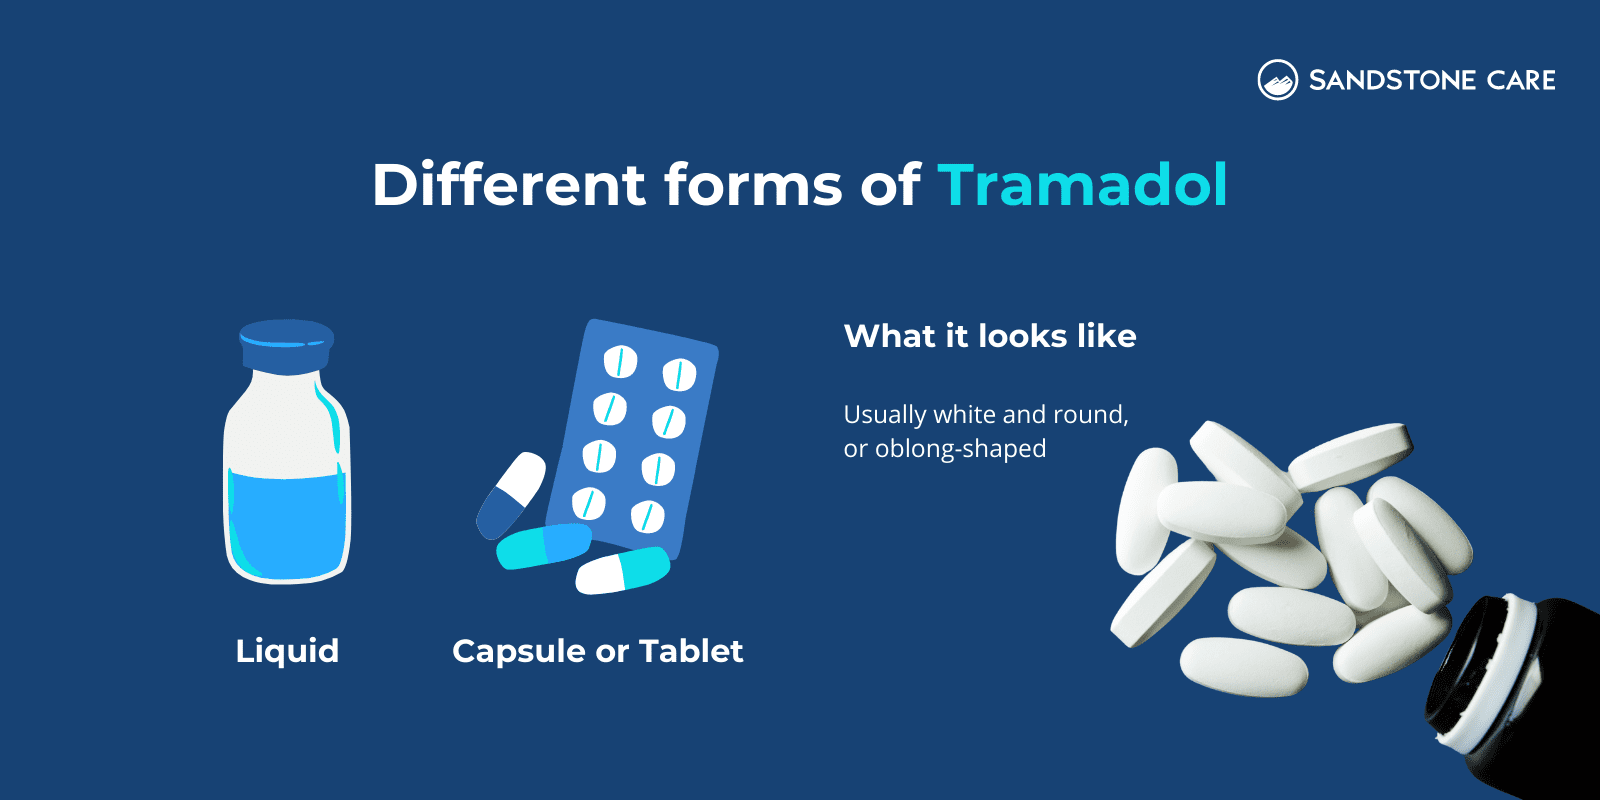 Different forms of Tramadol text written on top of liquid illustration & liquid text; Capsule & tablet illustration and "Capsule or Tablet" text and "What it looks like," "Usually white and round, or oblong-shaped" text next to an image of white oblong-shaped pills